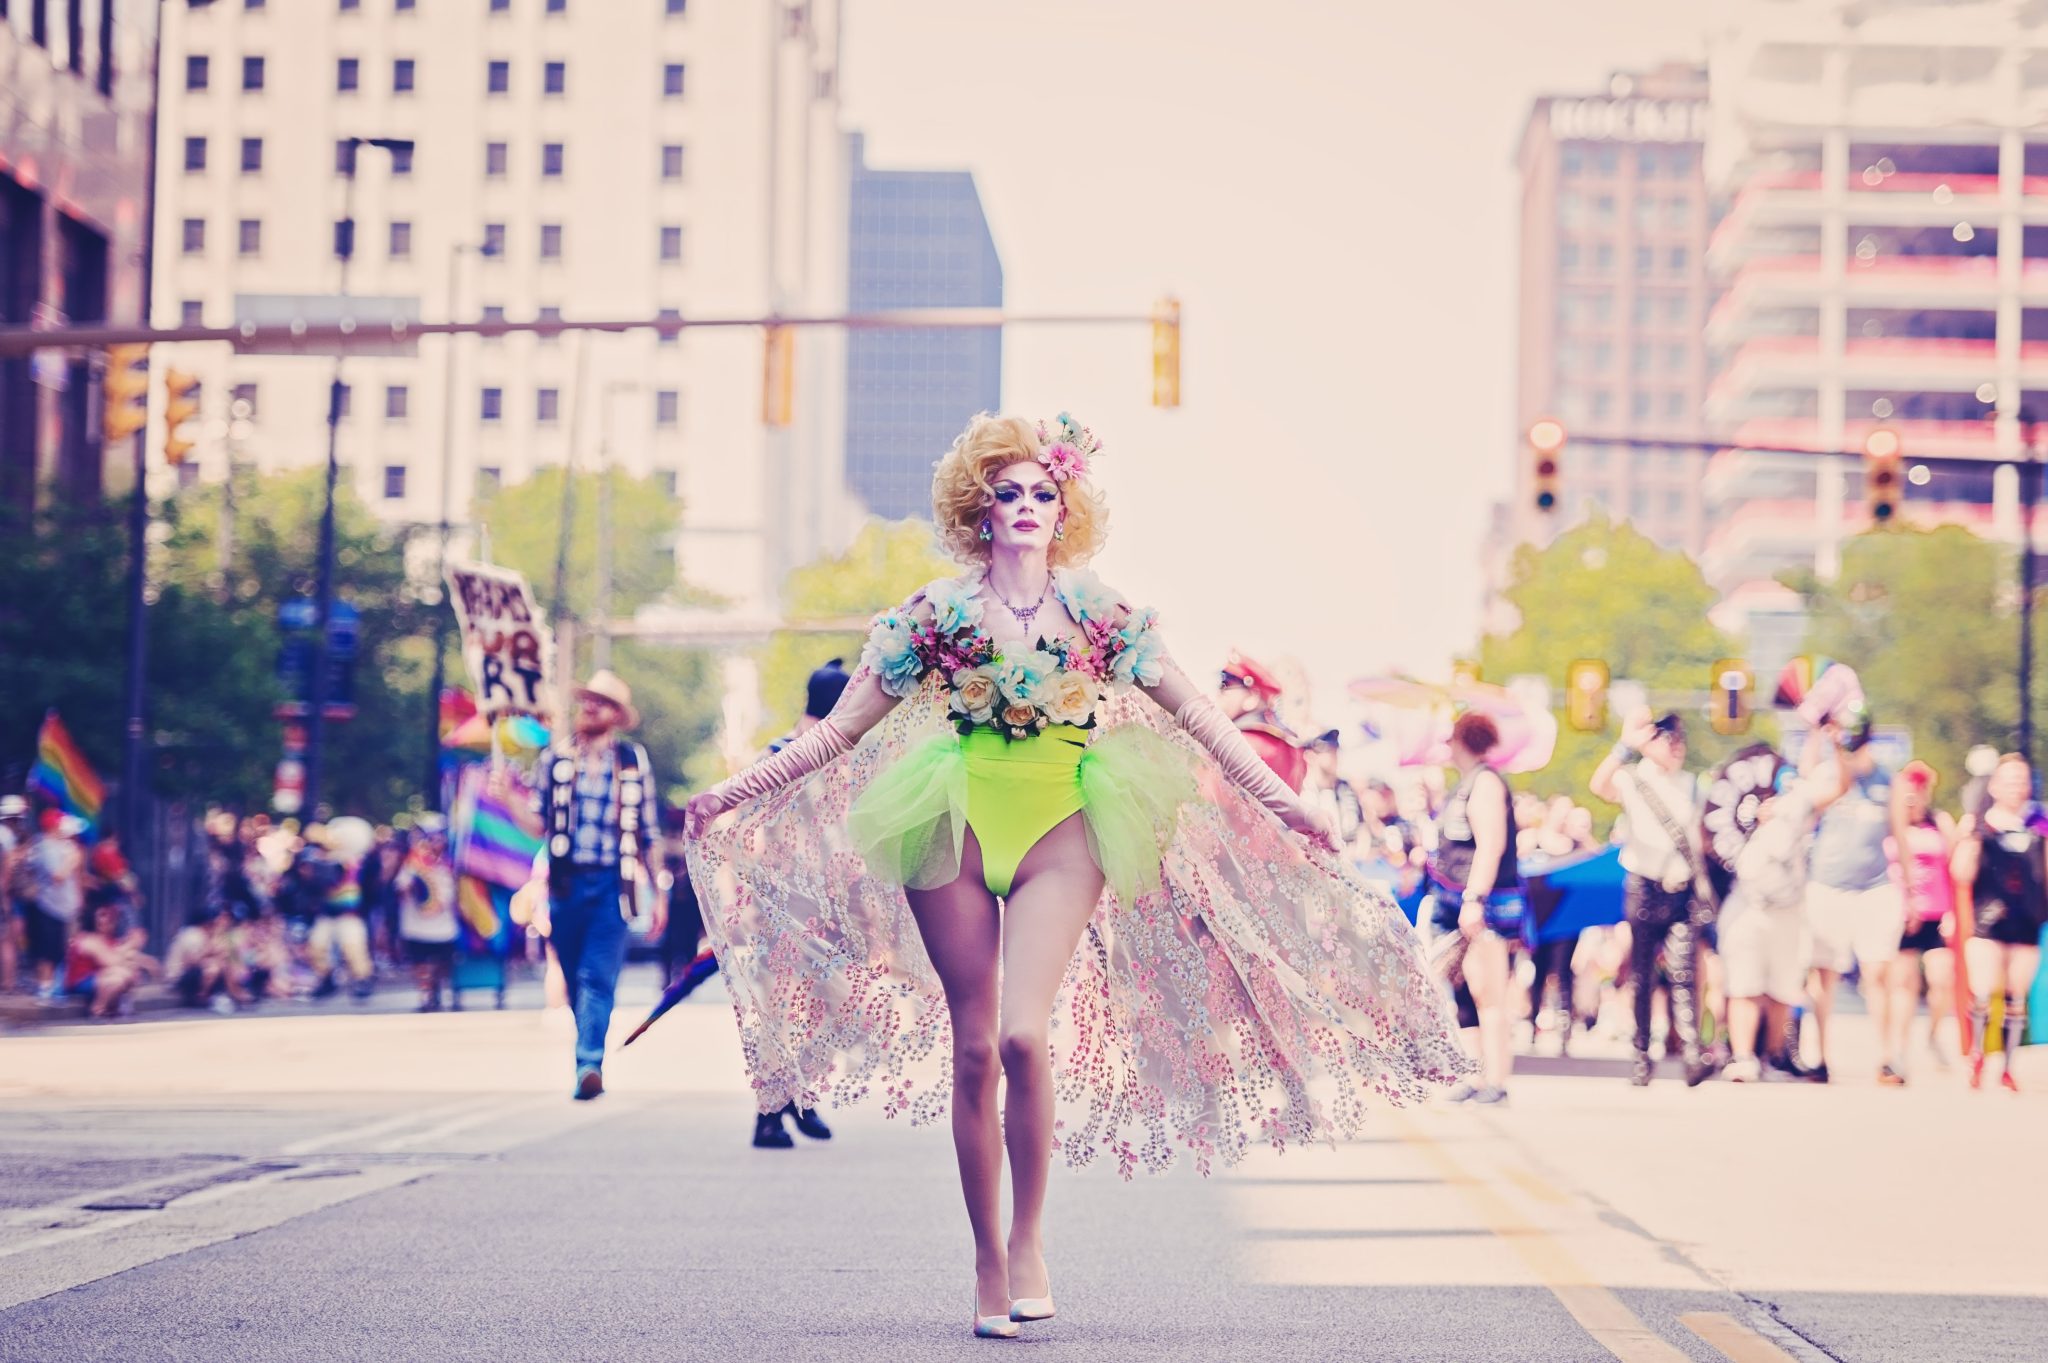 Revel in Spectrum: A Photographic Ode to Pride Parades